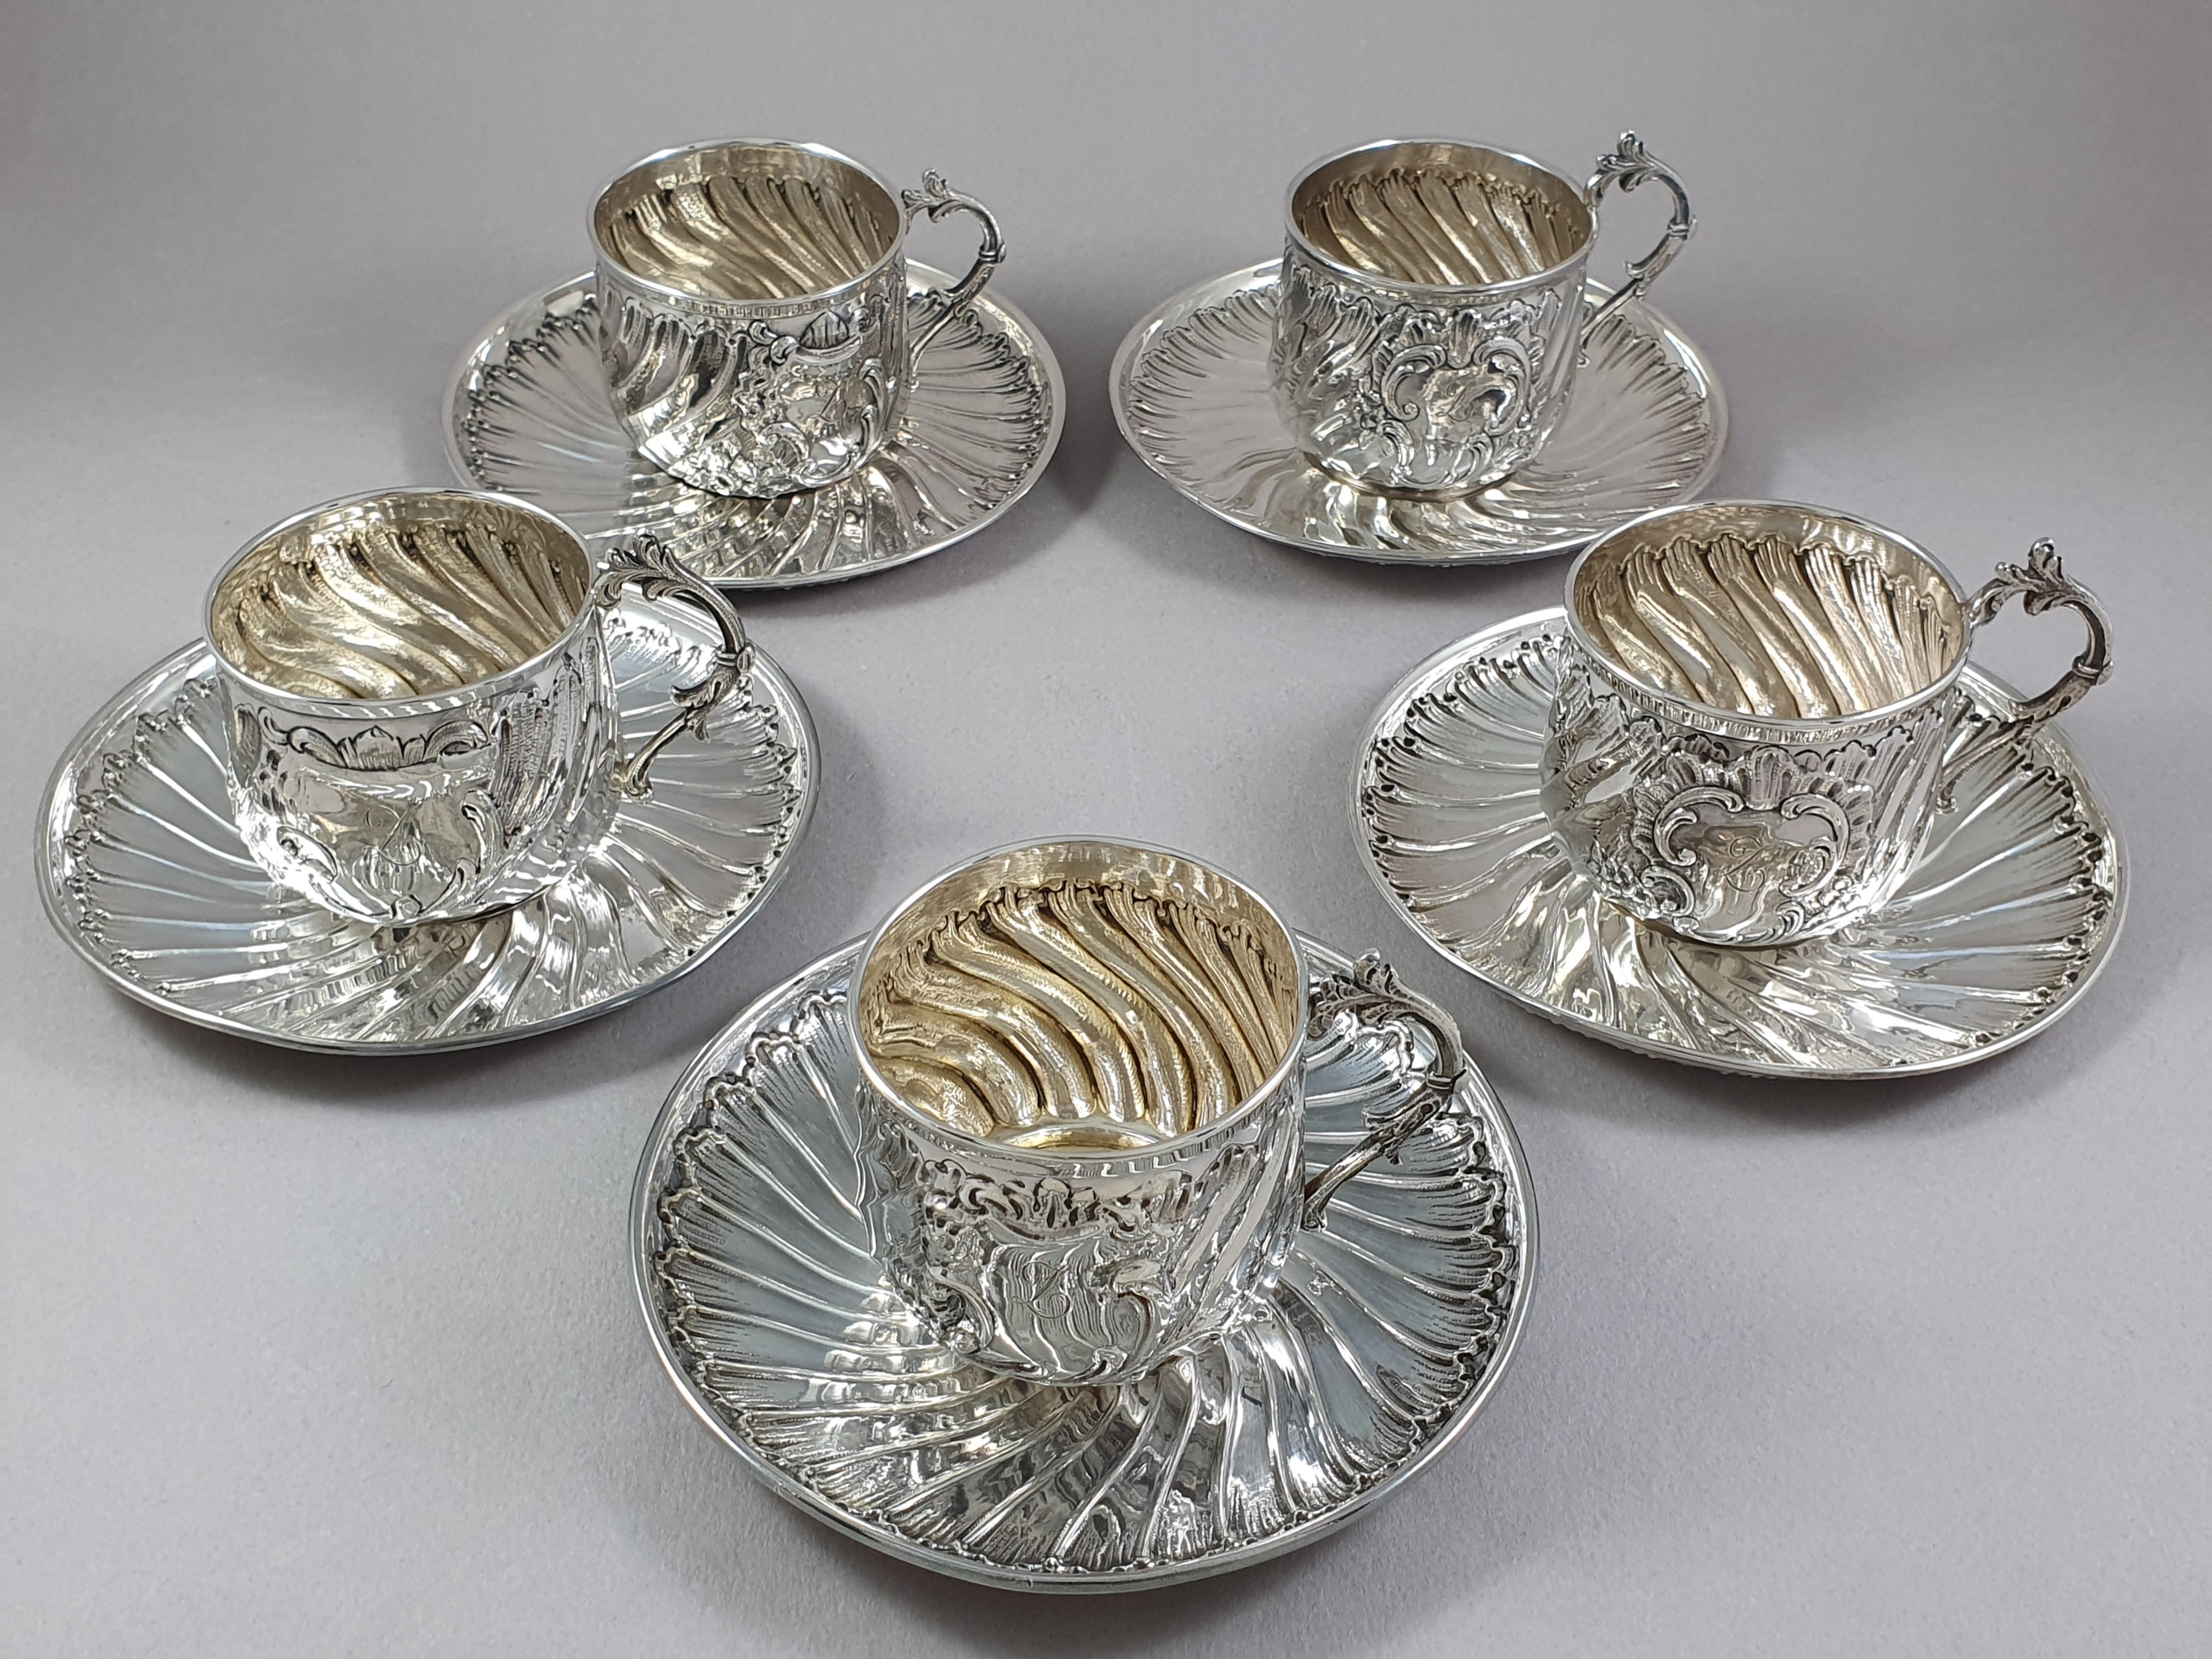 19th French set of 5 Sterling Silver Tea Cups and Saucers

With twisted decoration, the medallion surrounded by rockery motifs and flowers 

Hallmarked Minerva 1st title for 950/1000 purity silver
Silversmith: Bouclier & Paris 

Cup height: